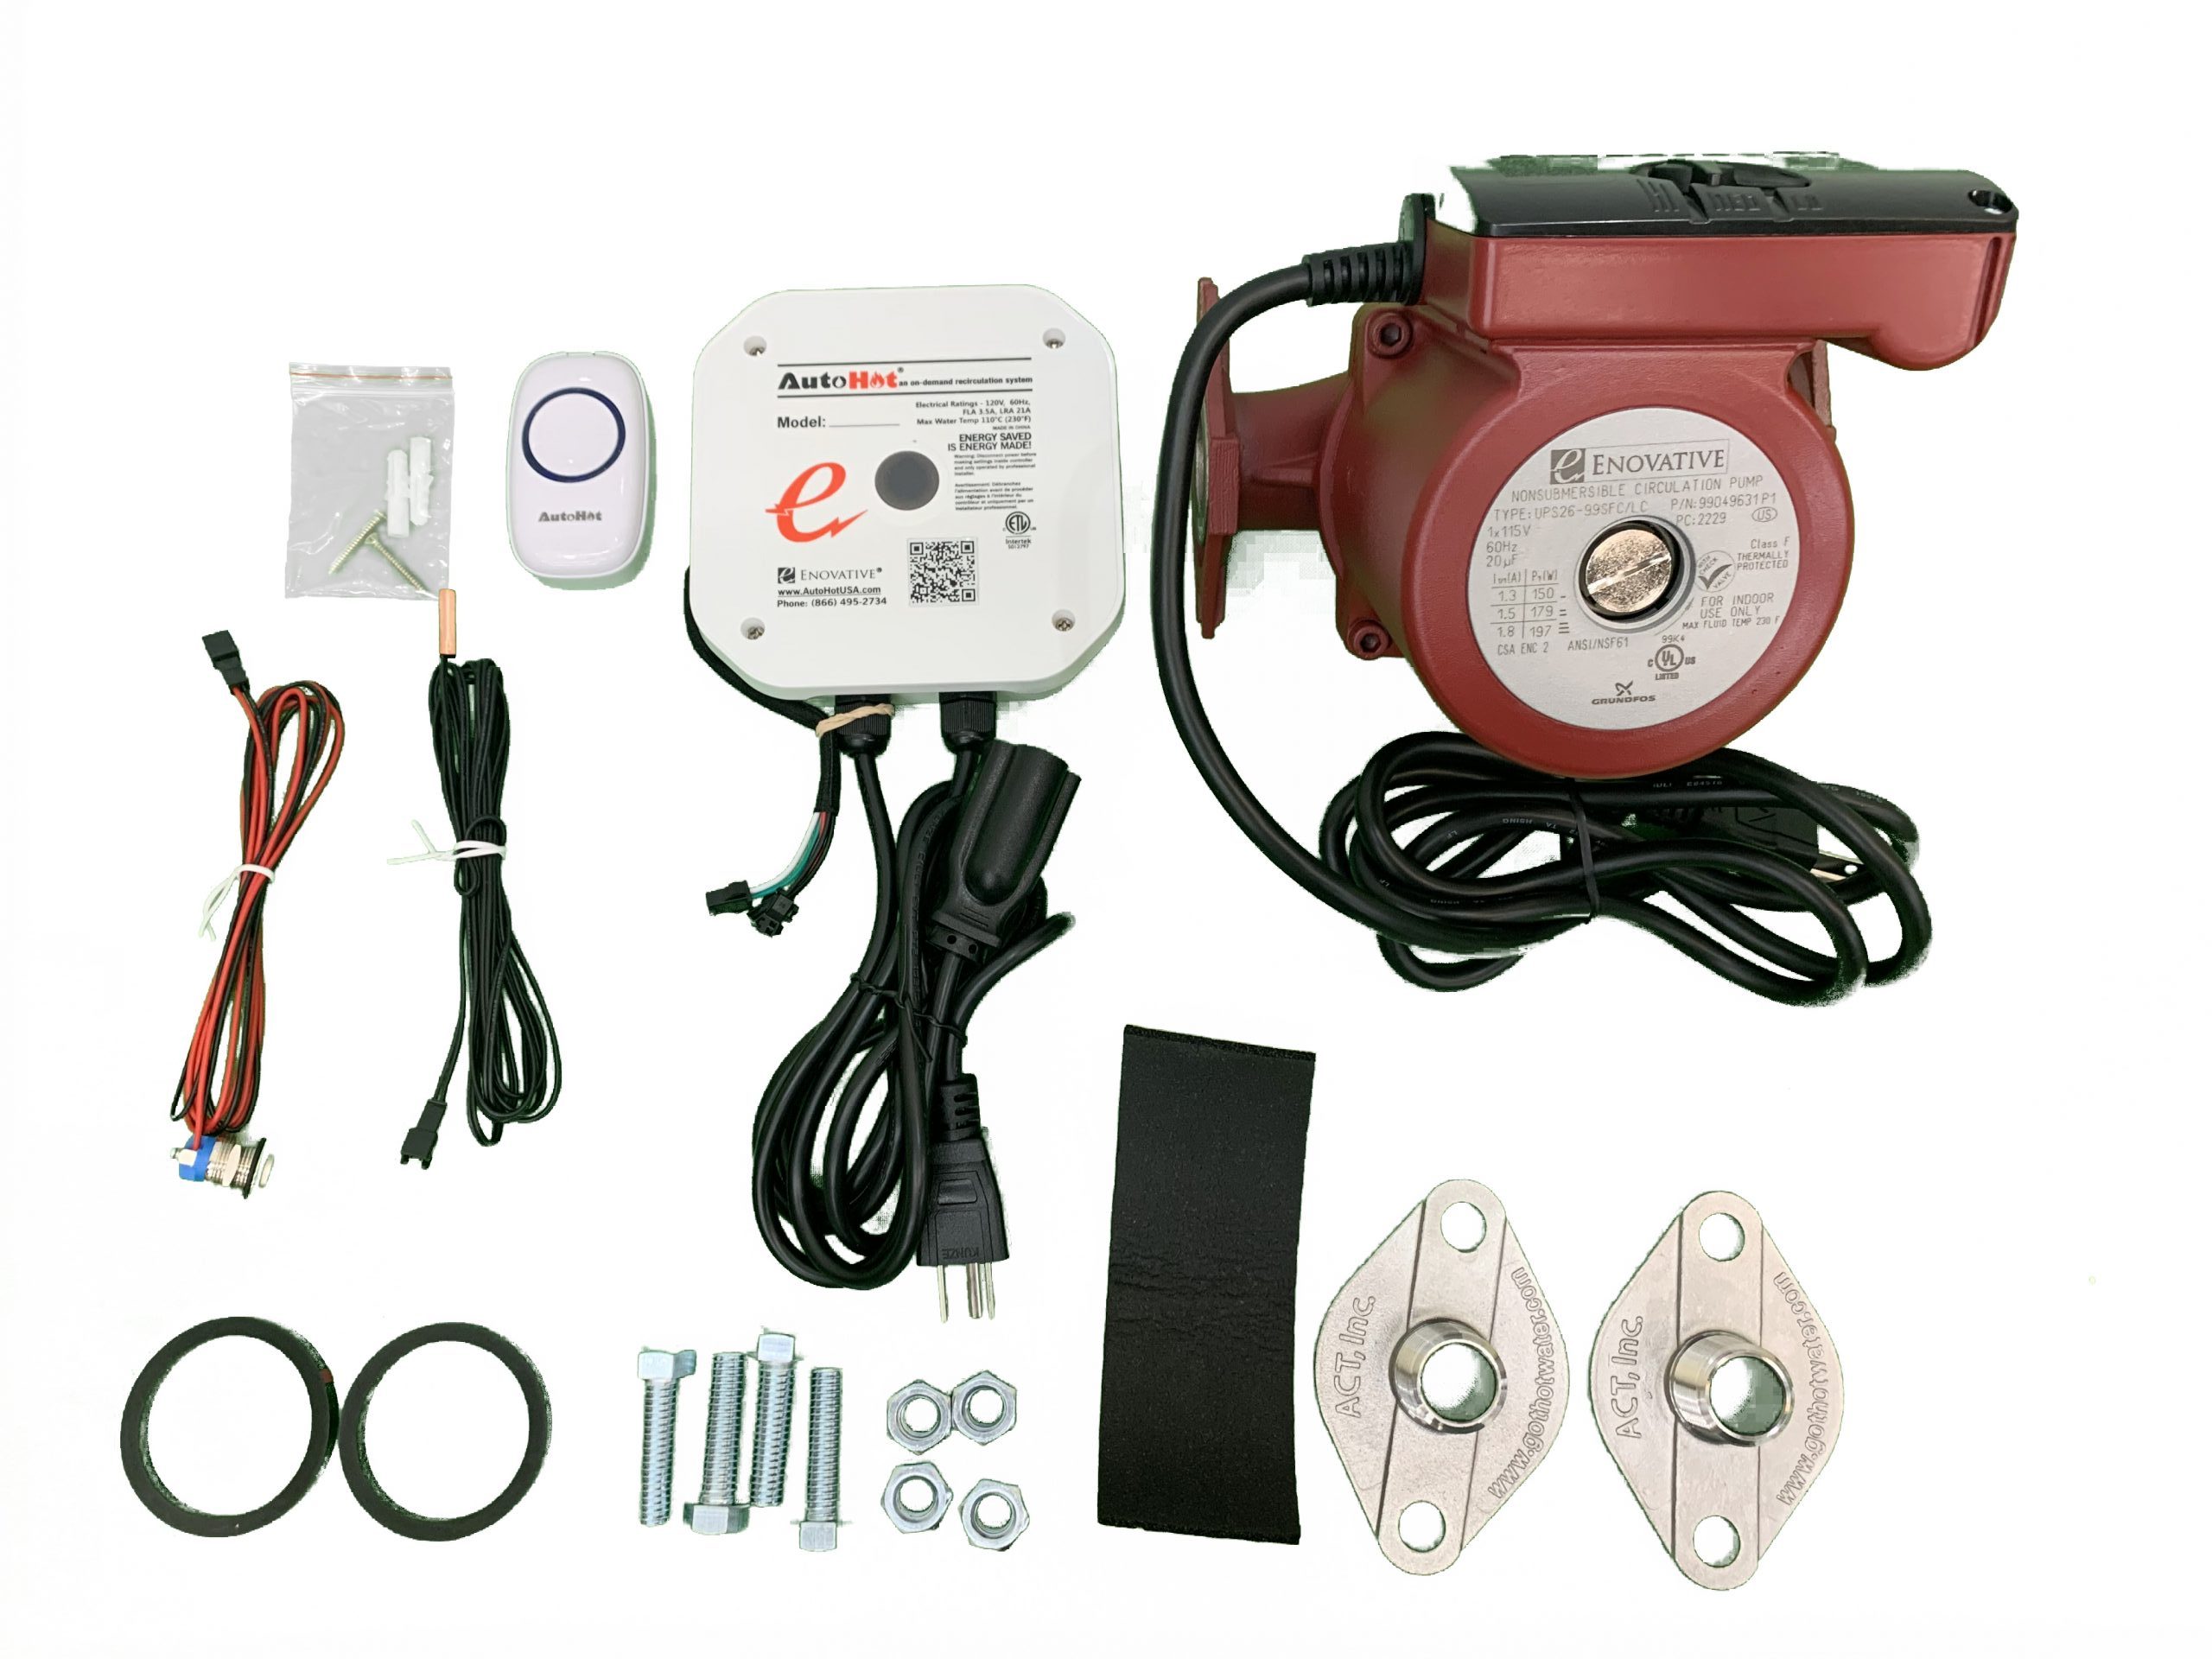 99-Series pump AutoHot On-Demand electric hot water heater